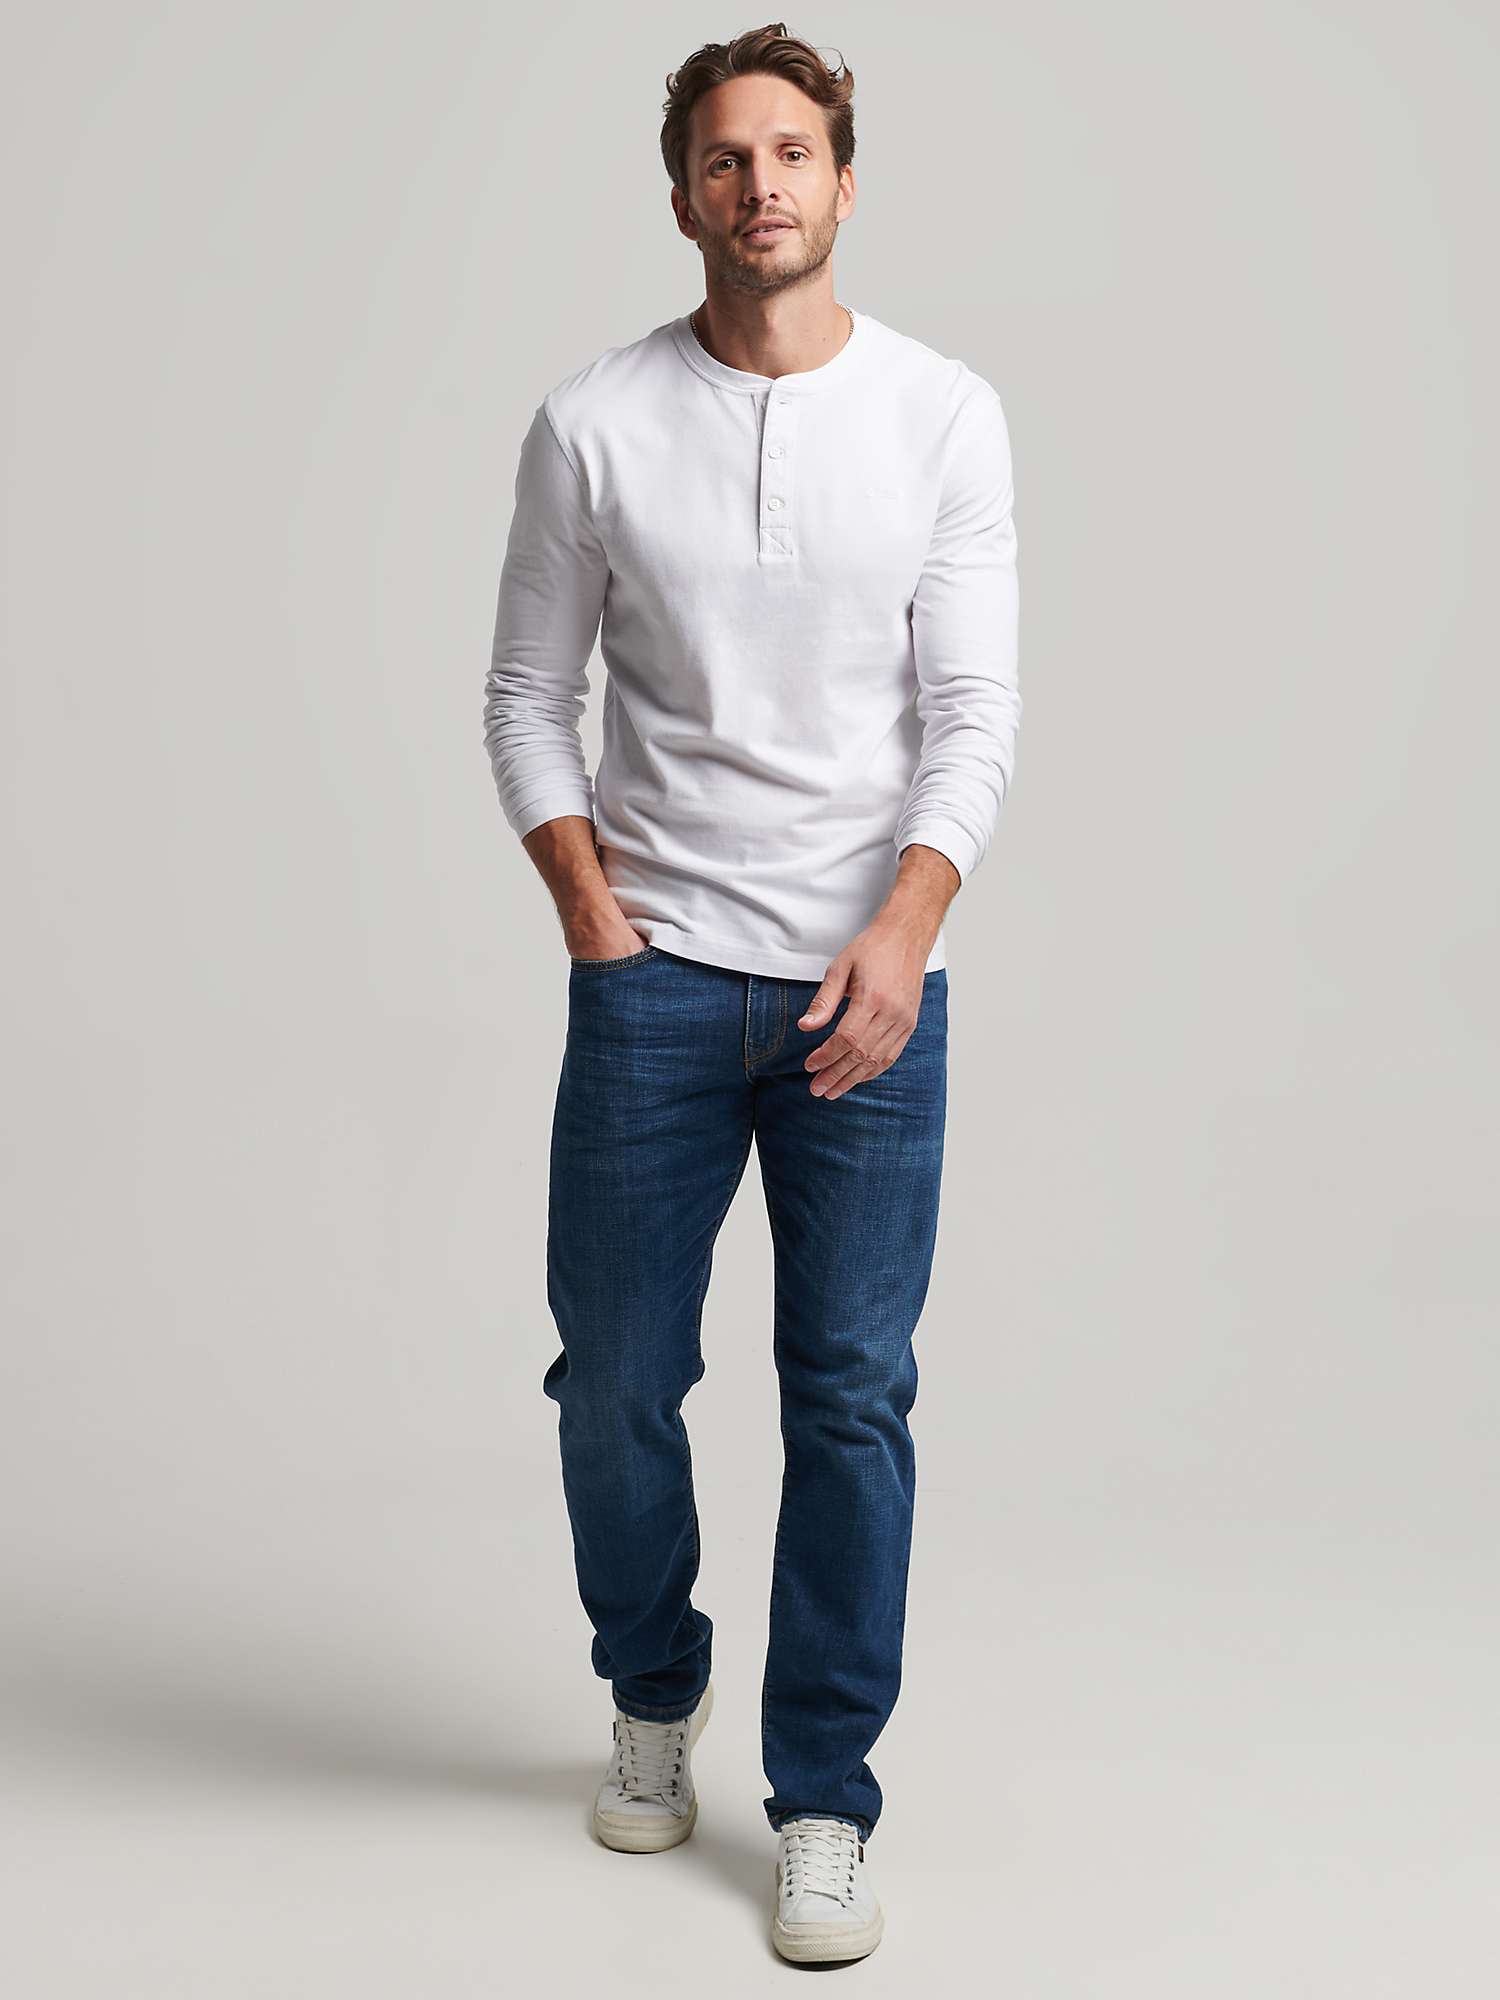 Buy Superdry Organic Cotton Henley Long Sleeve T-Shirt Online at johnlewis.com